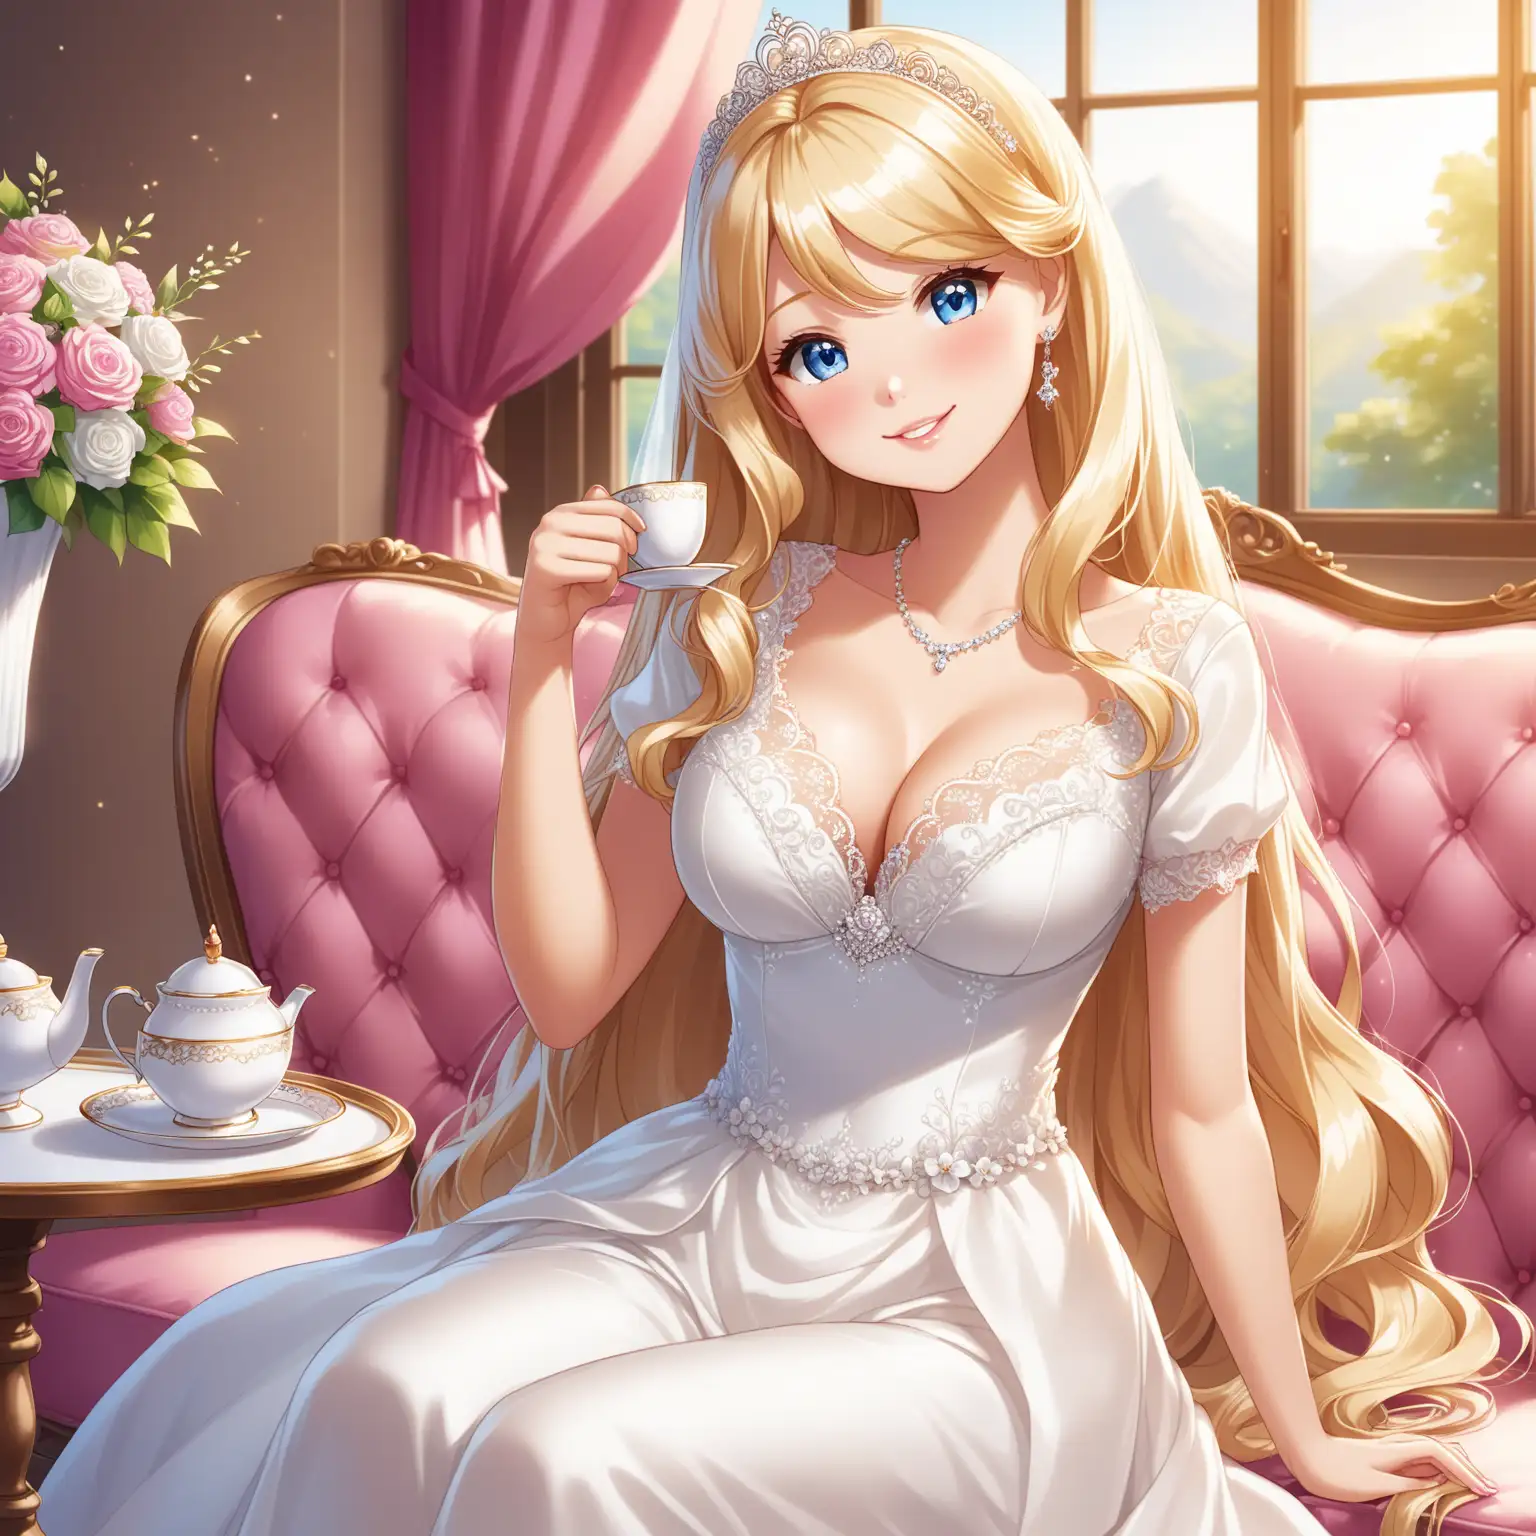 Happy Stacie from Barbie Enjoying Her Day with Tea in Gorgeous Wedding Dress